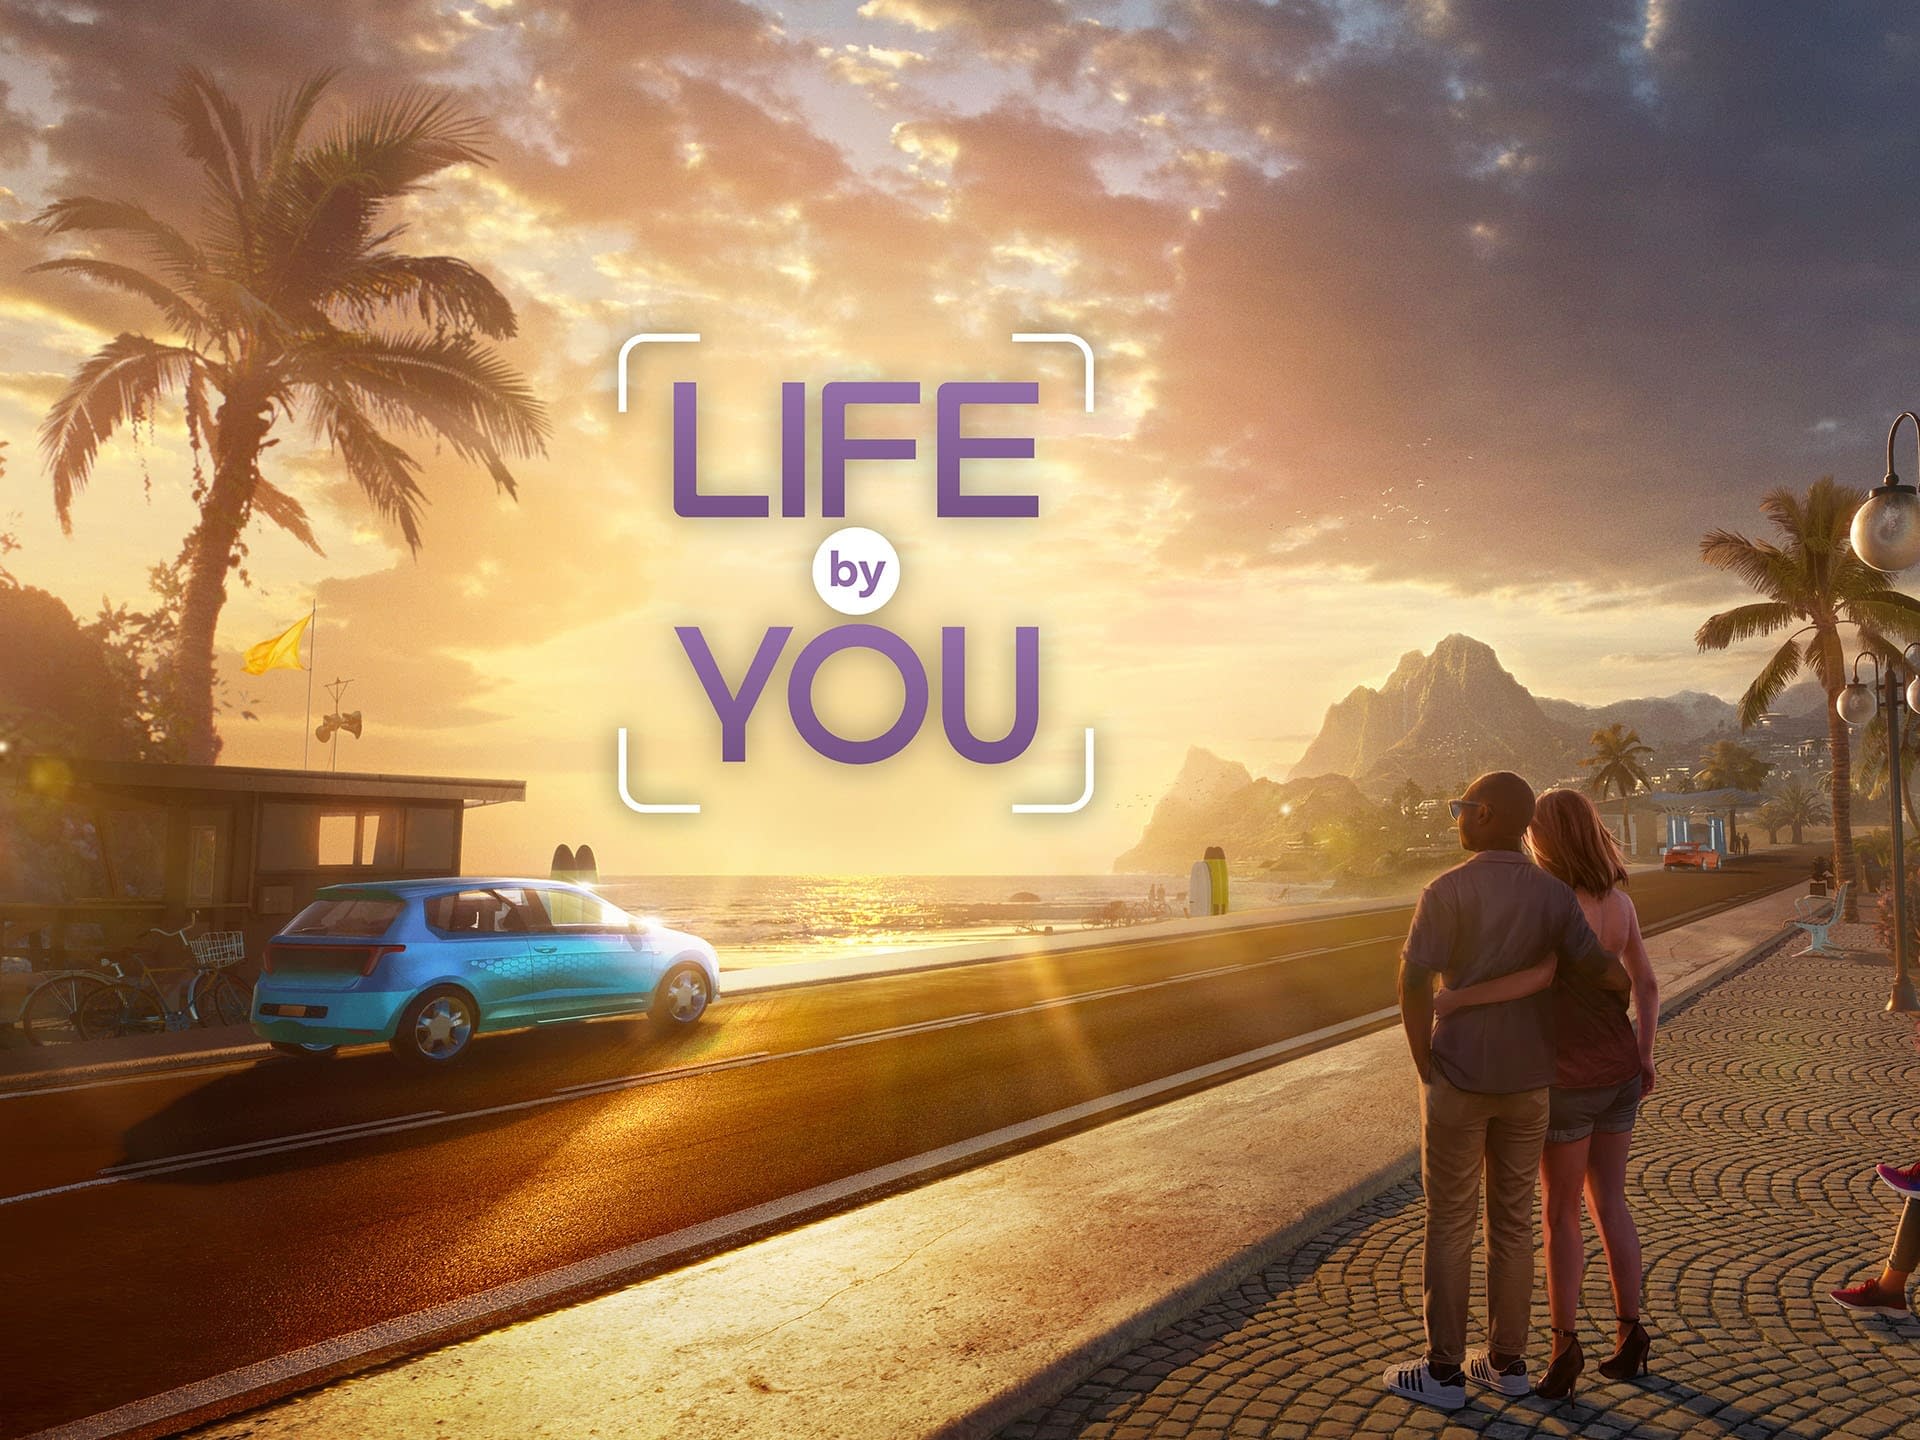 New Play Video for The Sims Rival Life by Yu Published